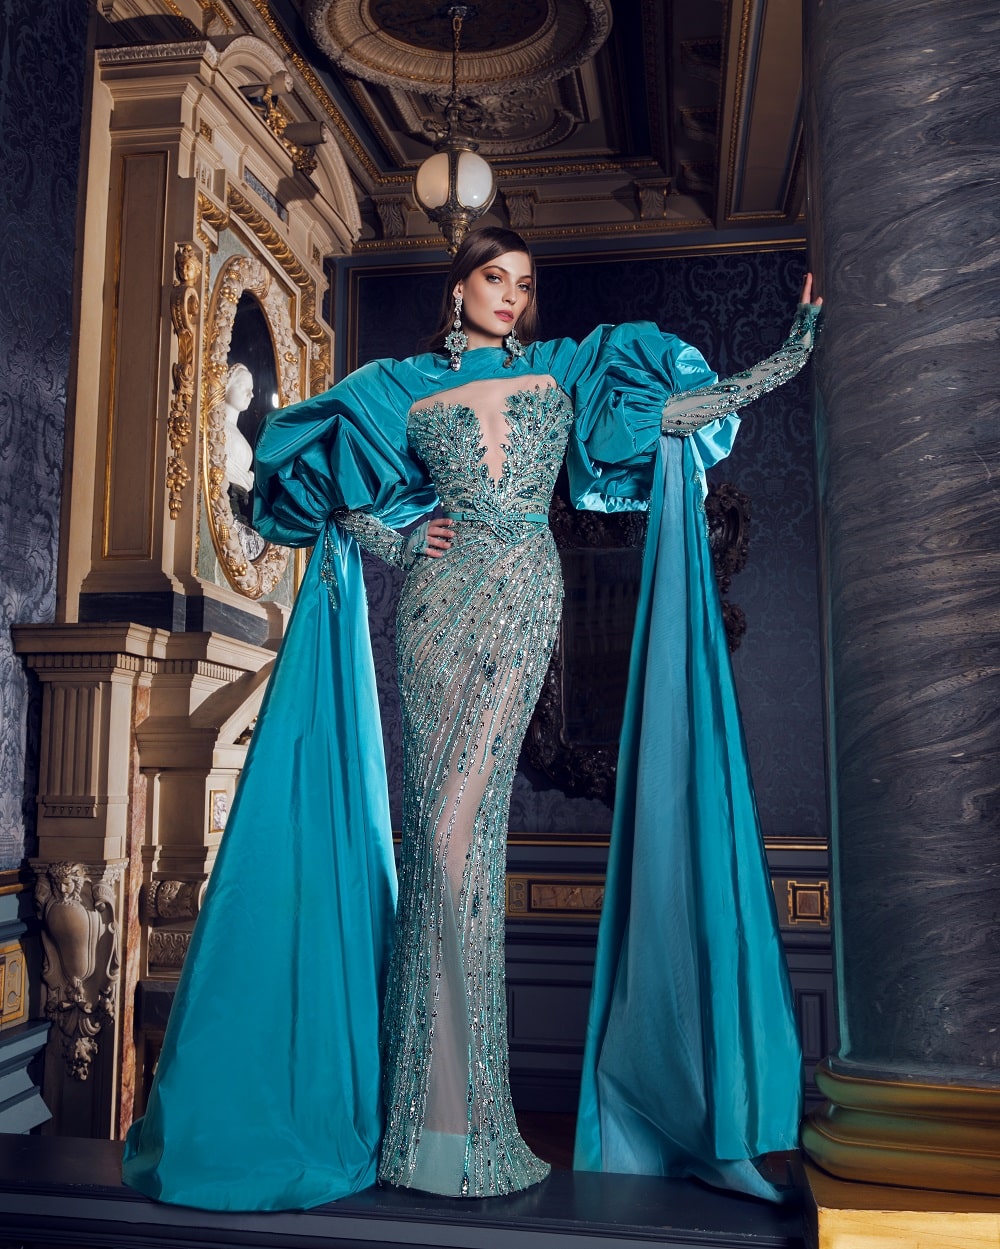 ZIAD NAKAD SPRING/SUMMER 2022 HAUTE COUTURE